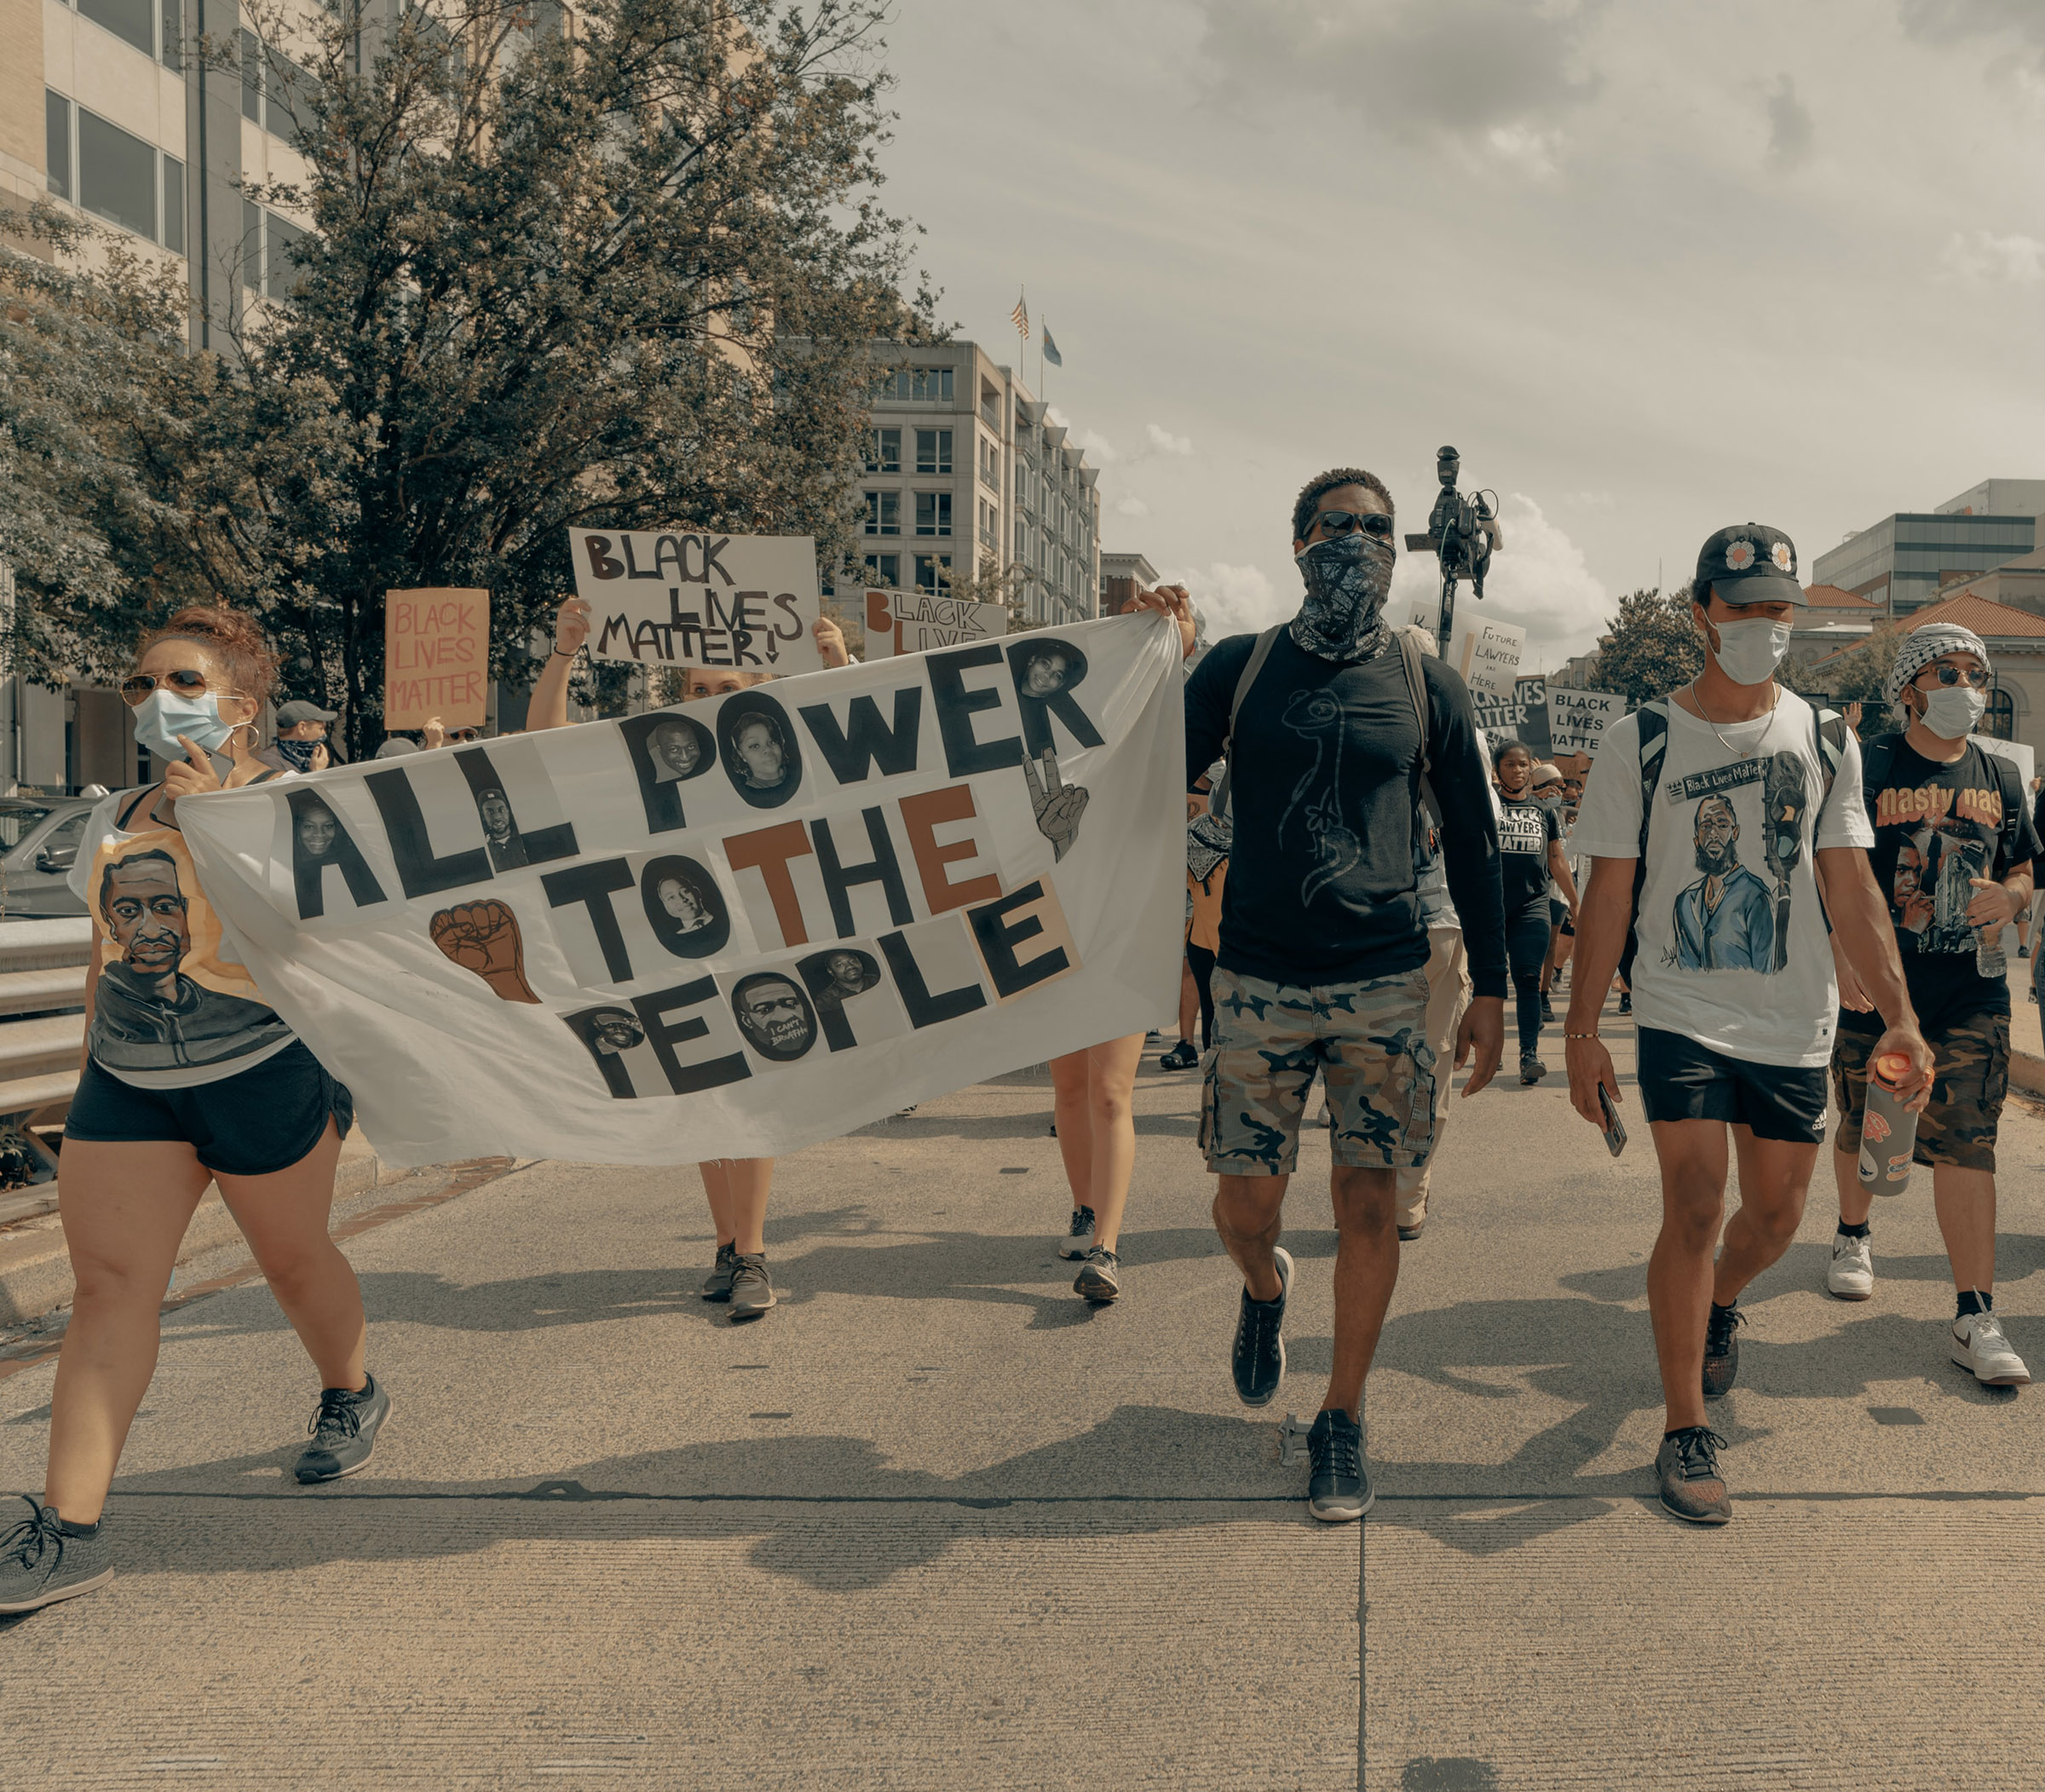 Black Lives Matter: Antiracist actions you can take now